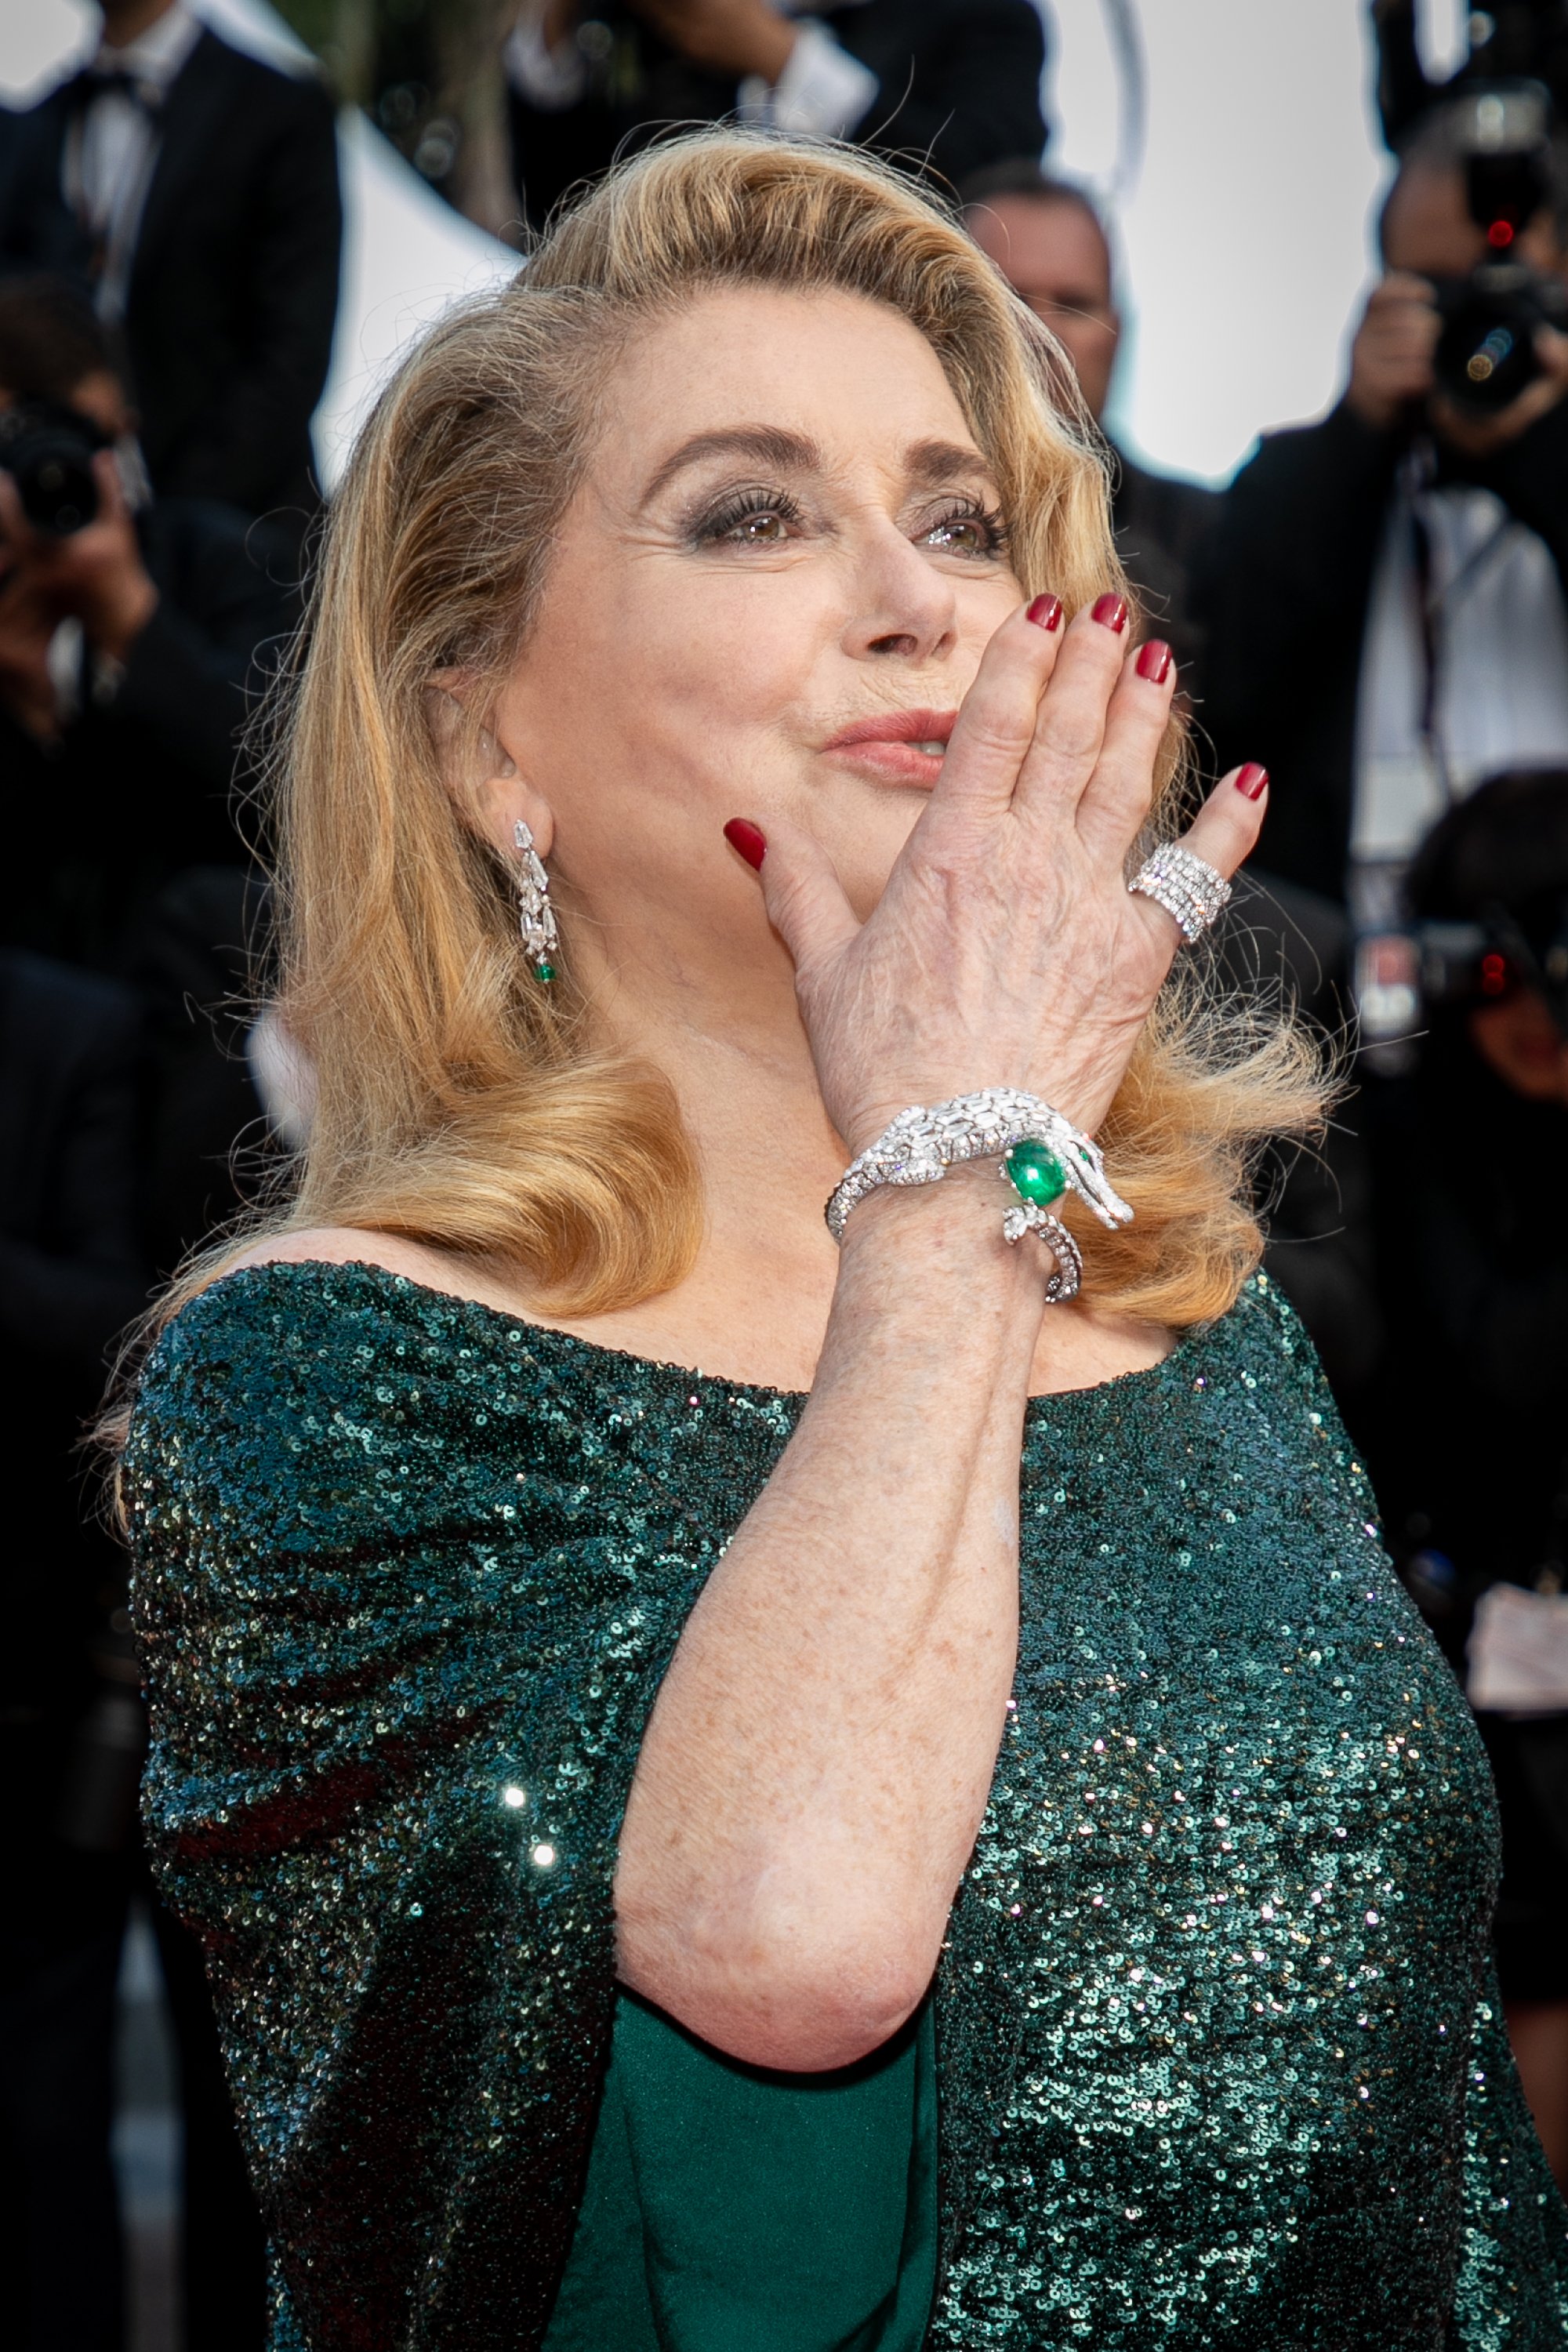 Catherine Deneuve in Cannes France 2019. | Source: Getty Images